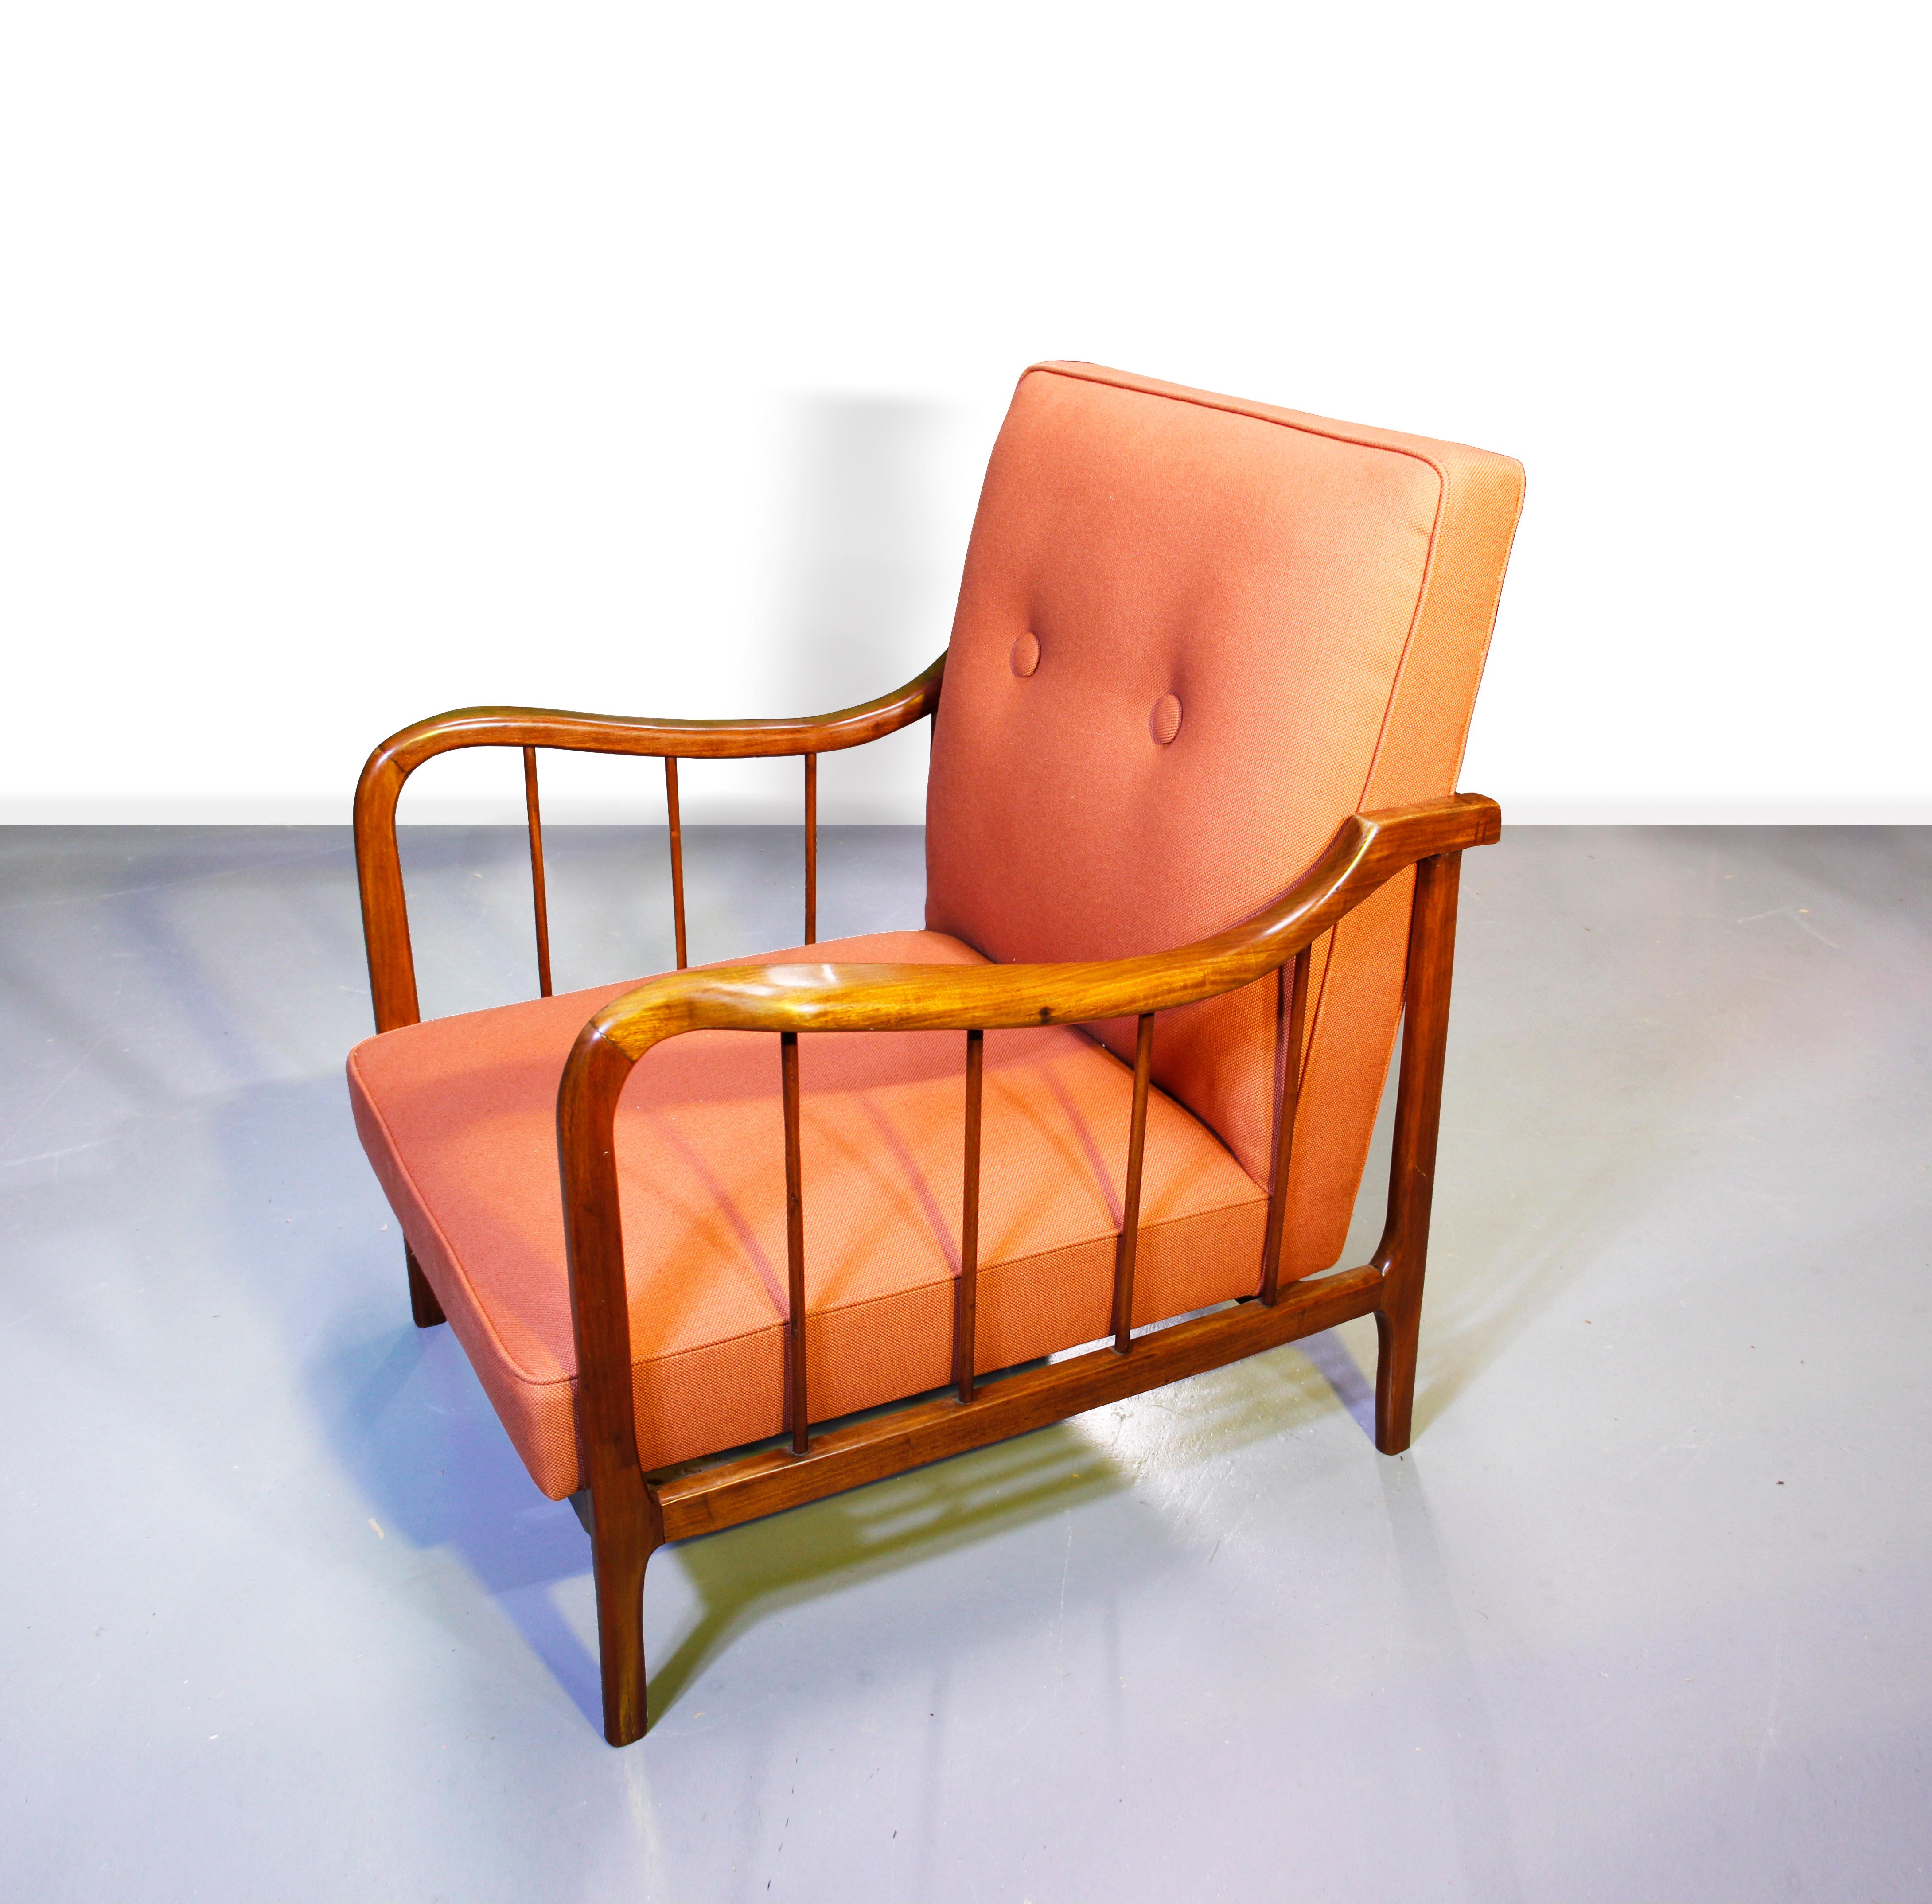 Woodwork Pair of Armchairs by Rino Levi, Brazil, 1950s